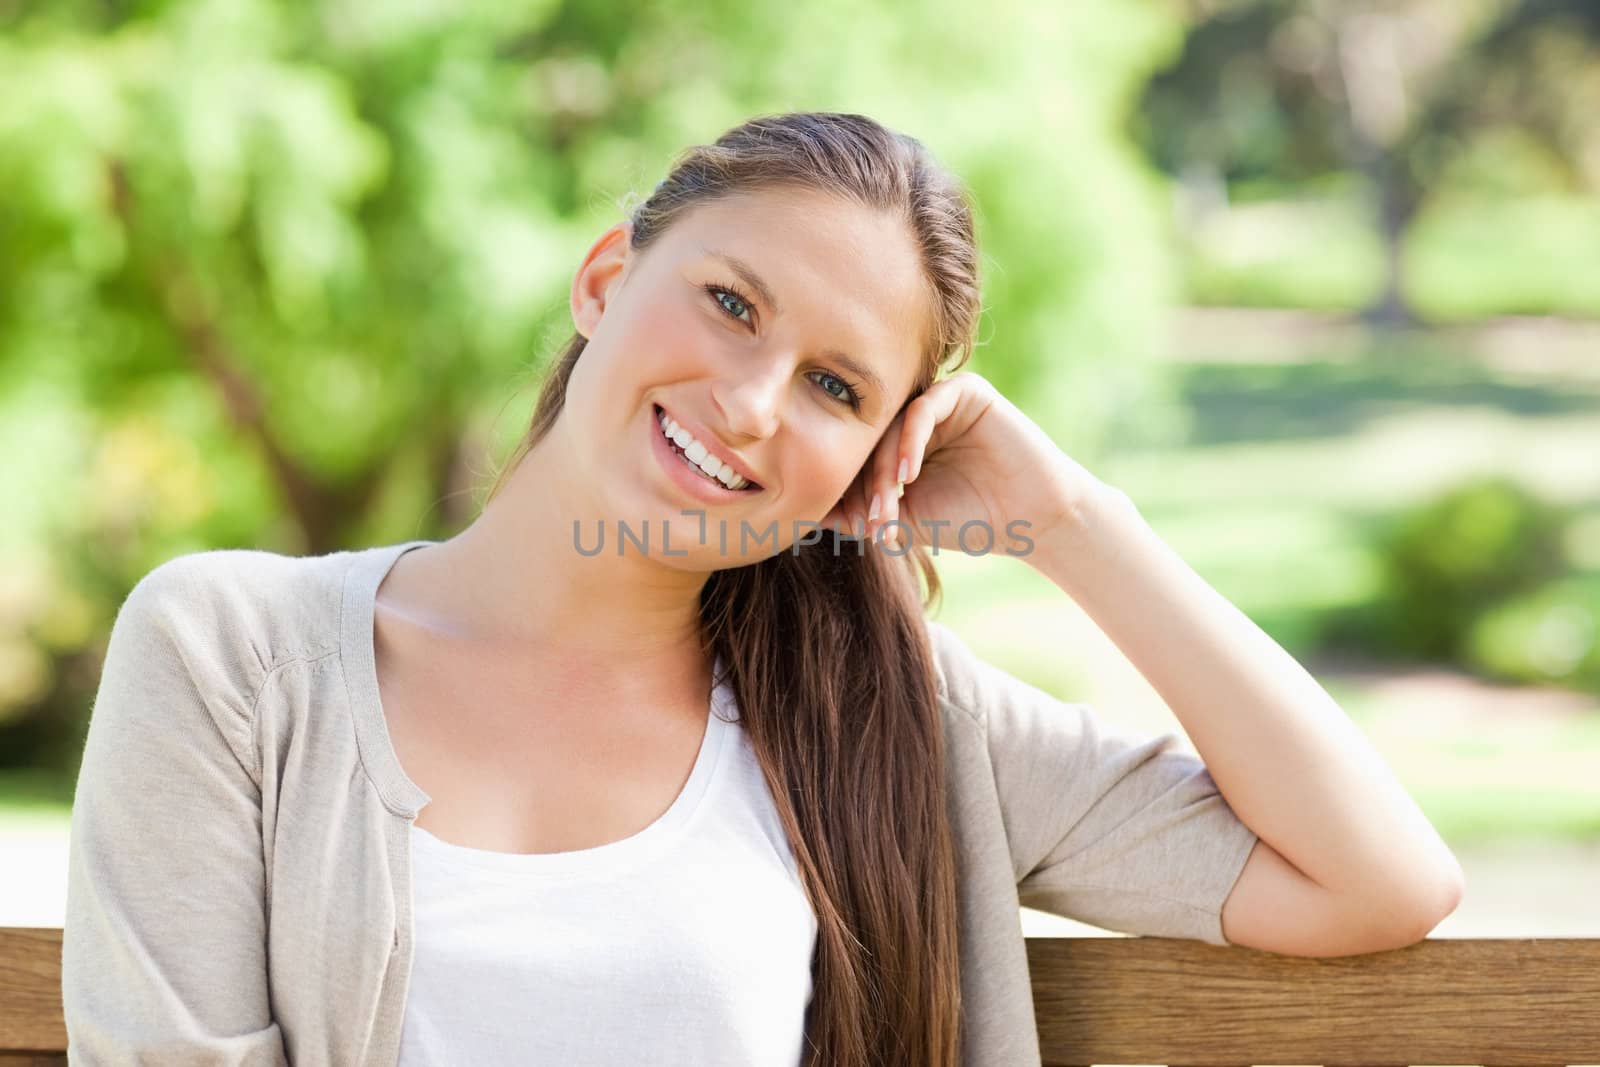 Smiling woman enjoying her day on a bench by Wavebreakmedia